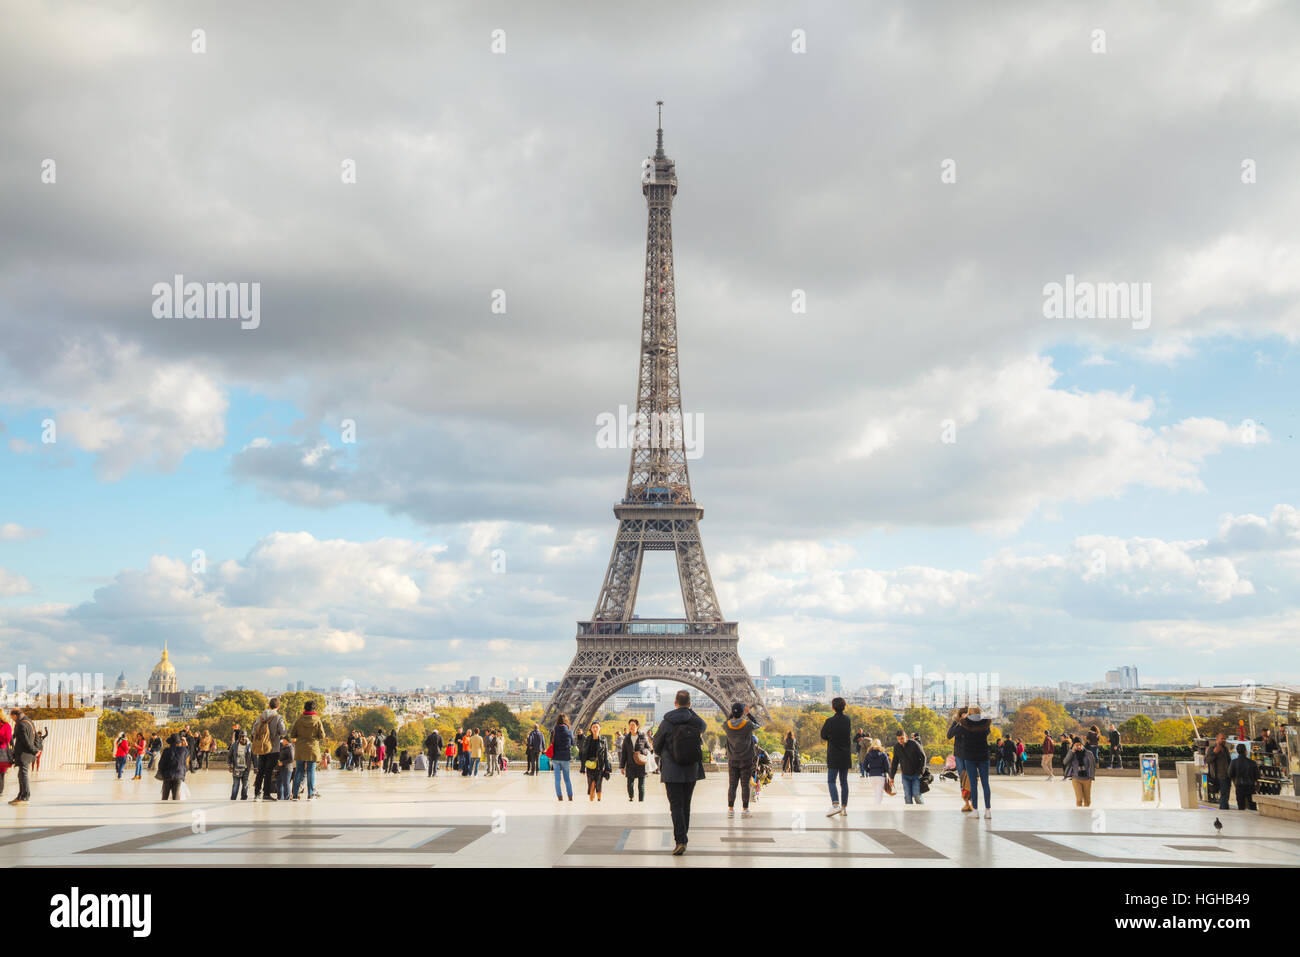 PARIS - NOVEMBER 2: Cityscape of Paris with the Eiffel tower on November 2, 2016 in Paris, France. Stock Photo